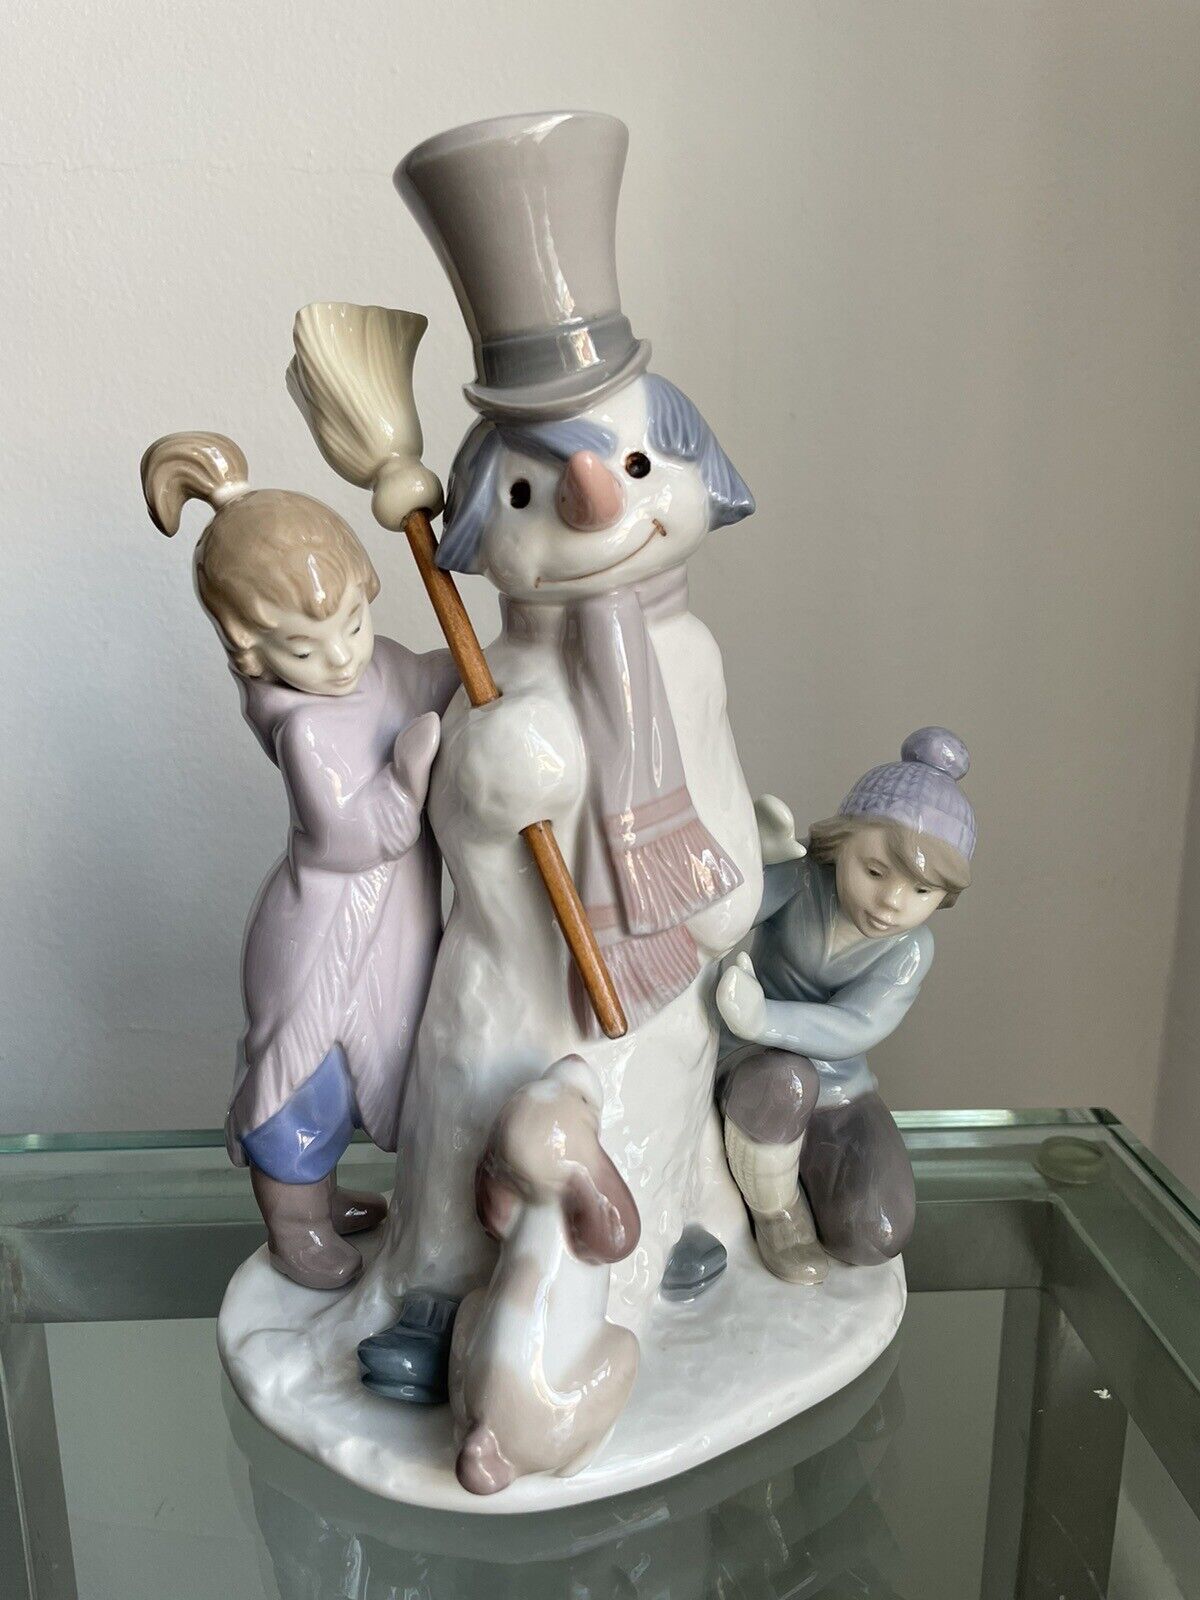 Lladro Collectible Figurine “The Snowman”